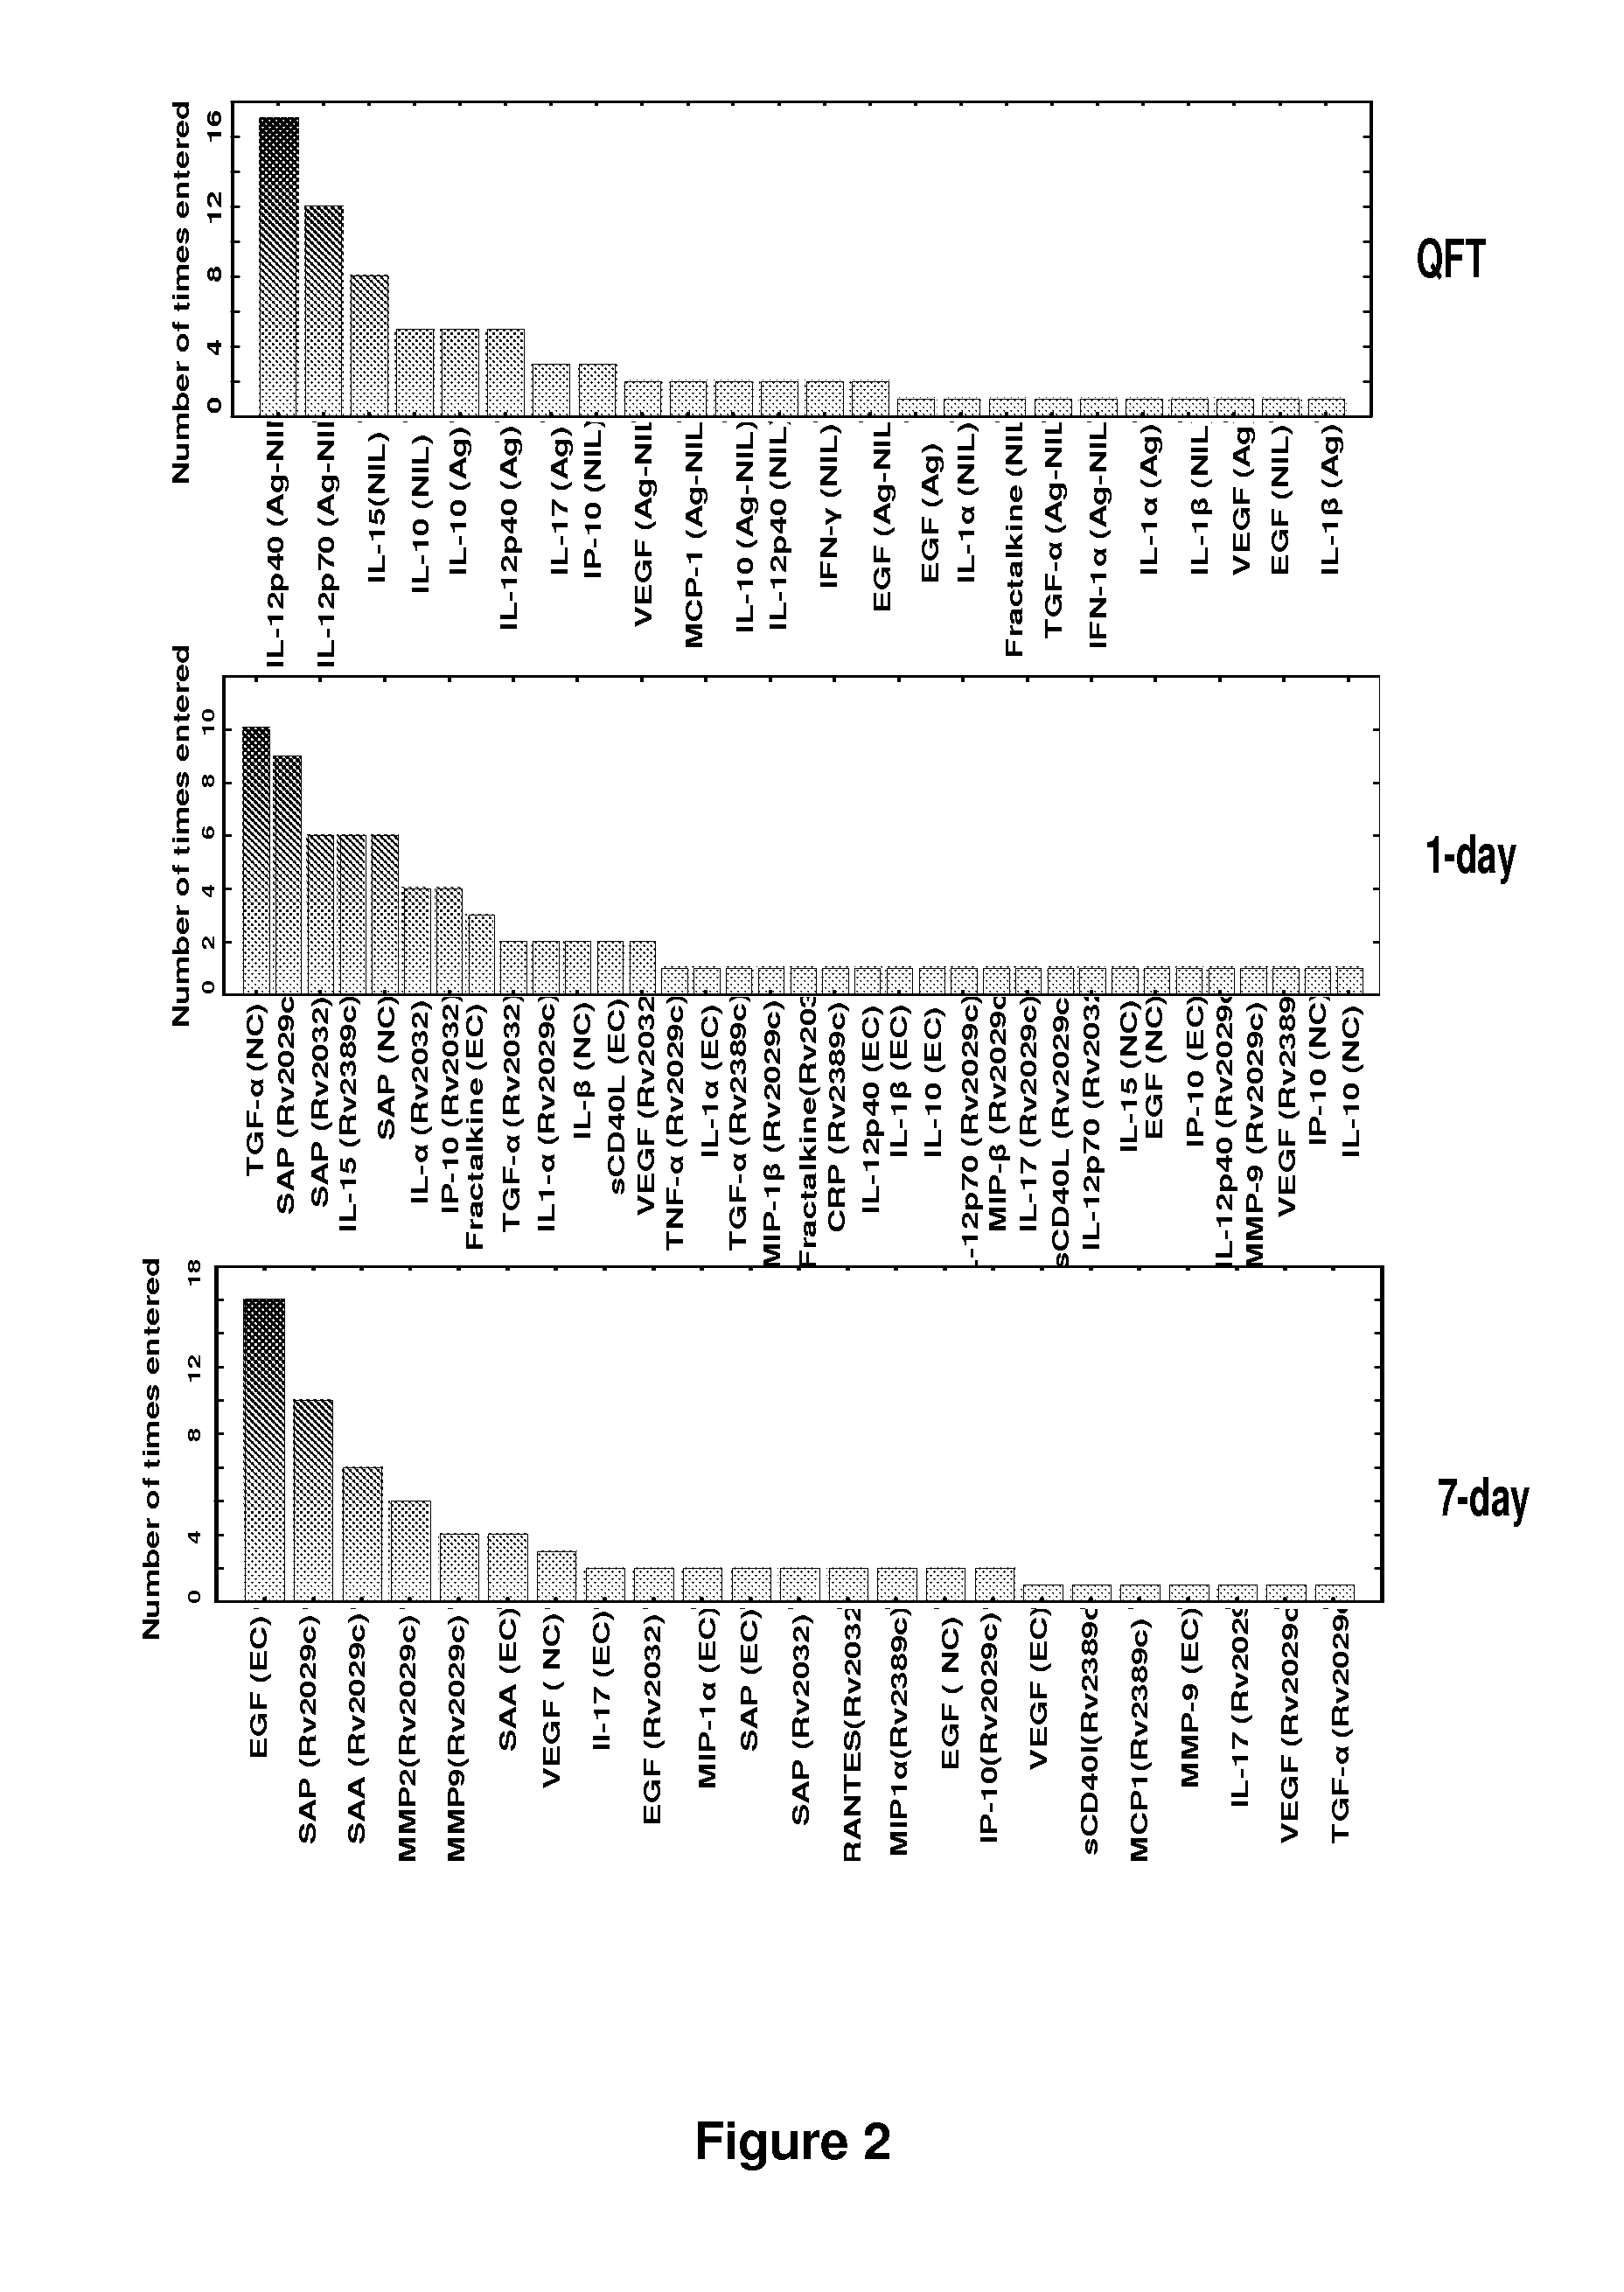 Method for Diagnosing Tuberculosis Disease by Detecting Induced Markers After Stimulation of T-Cells With Antigens